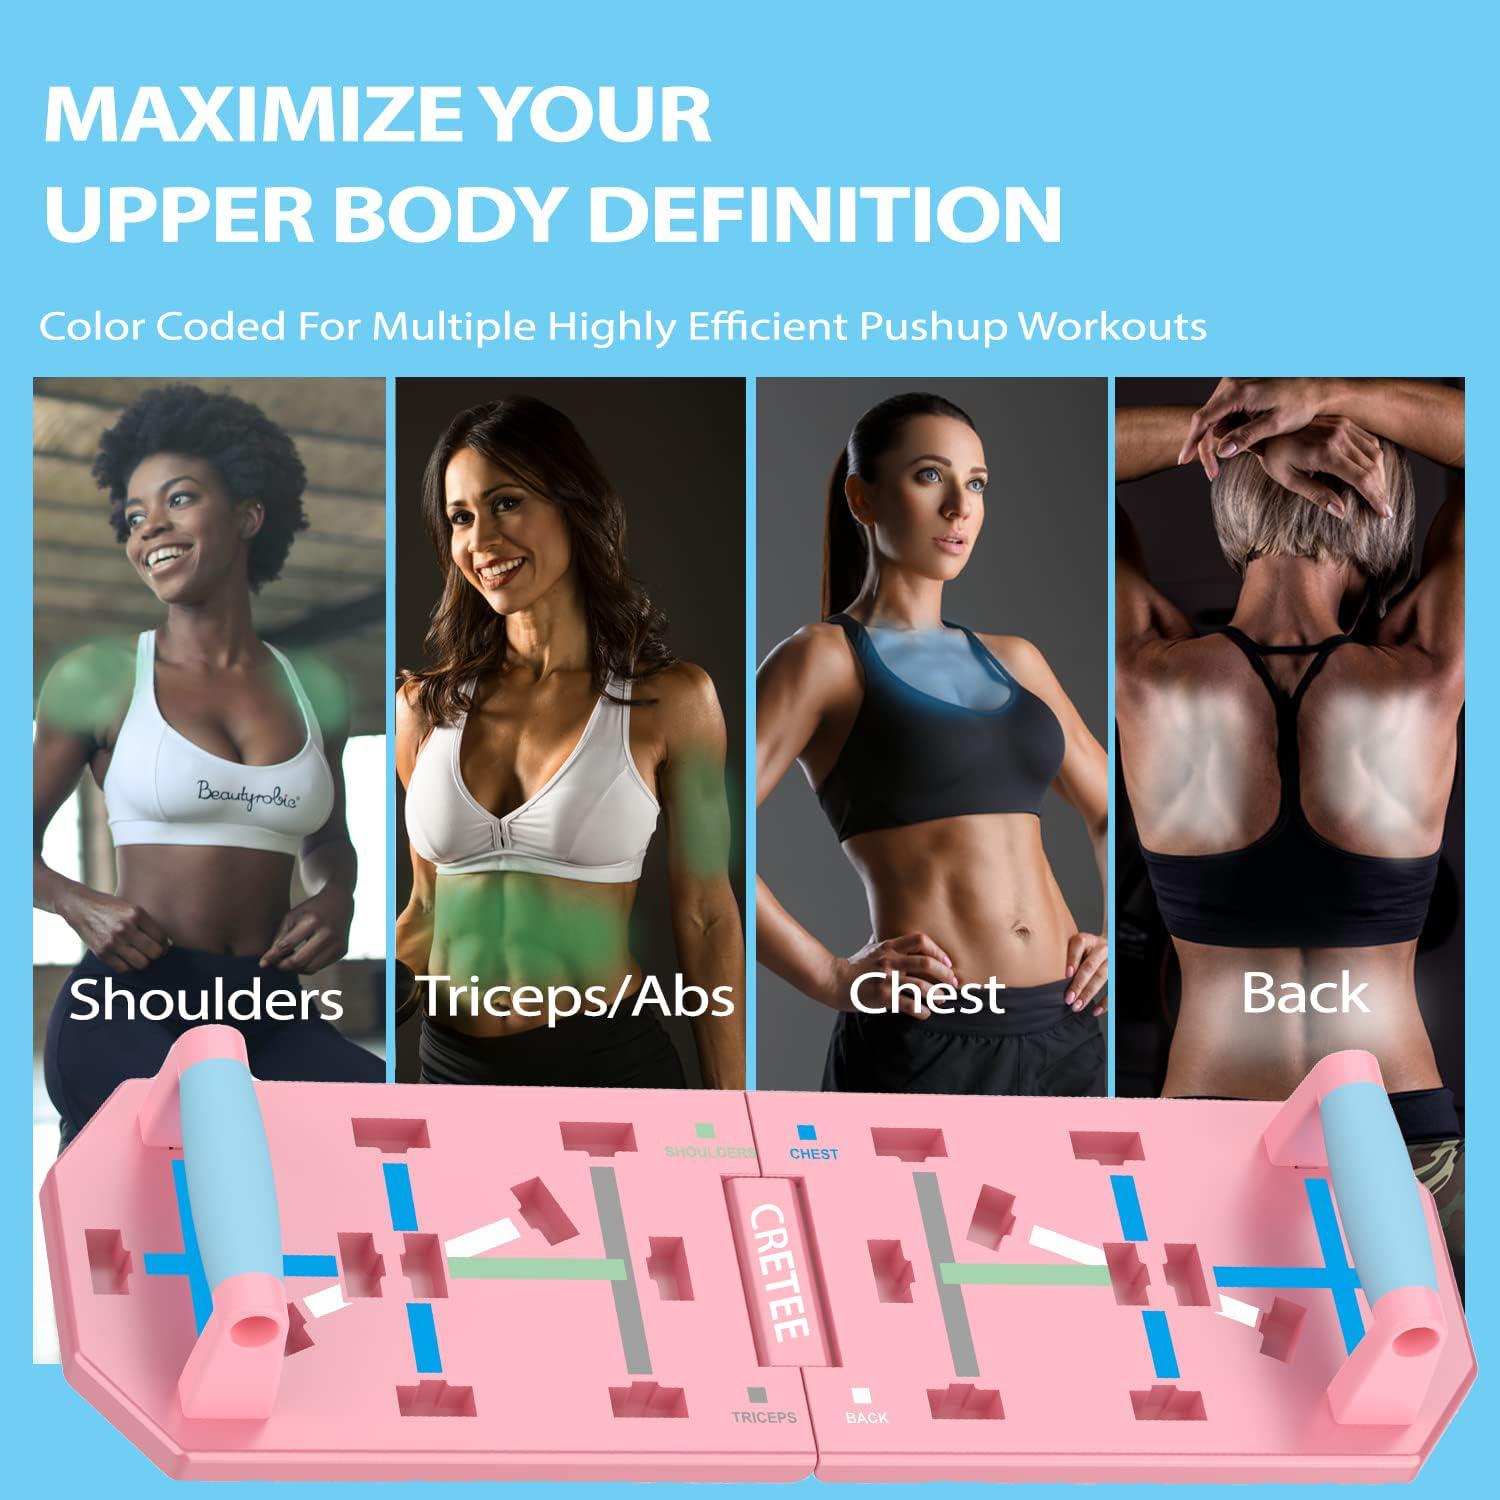 Pink Push Up Board Foldable Press Up Boards Fitness Workout Train Gym Muscle Strength Muscles Exercise Training for Men Women 1